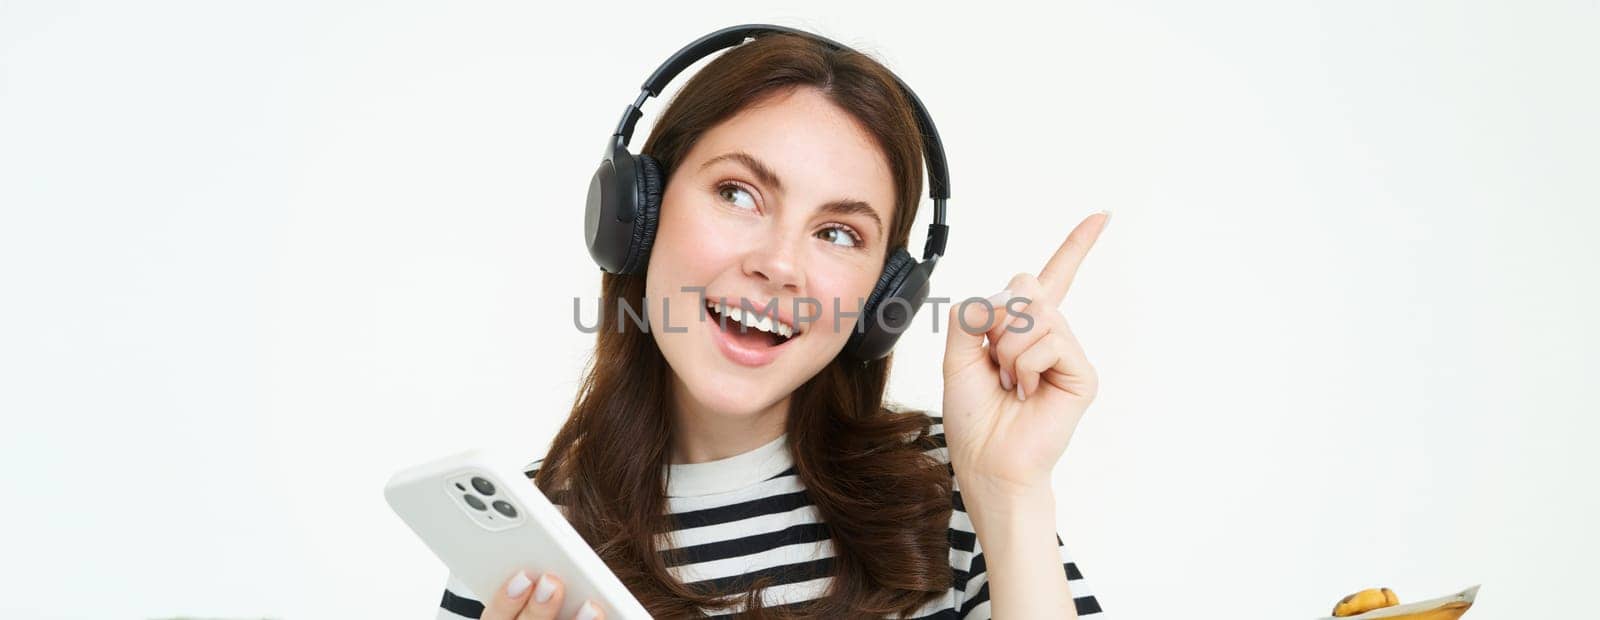 Happy beautiful woman, listening music in wireless headphones, holding mobile phone, pointing left at copy space, showing advertisement, white background.